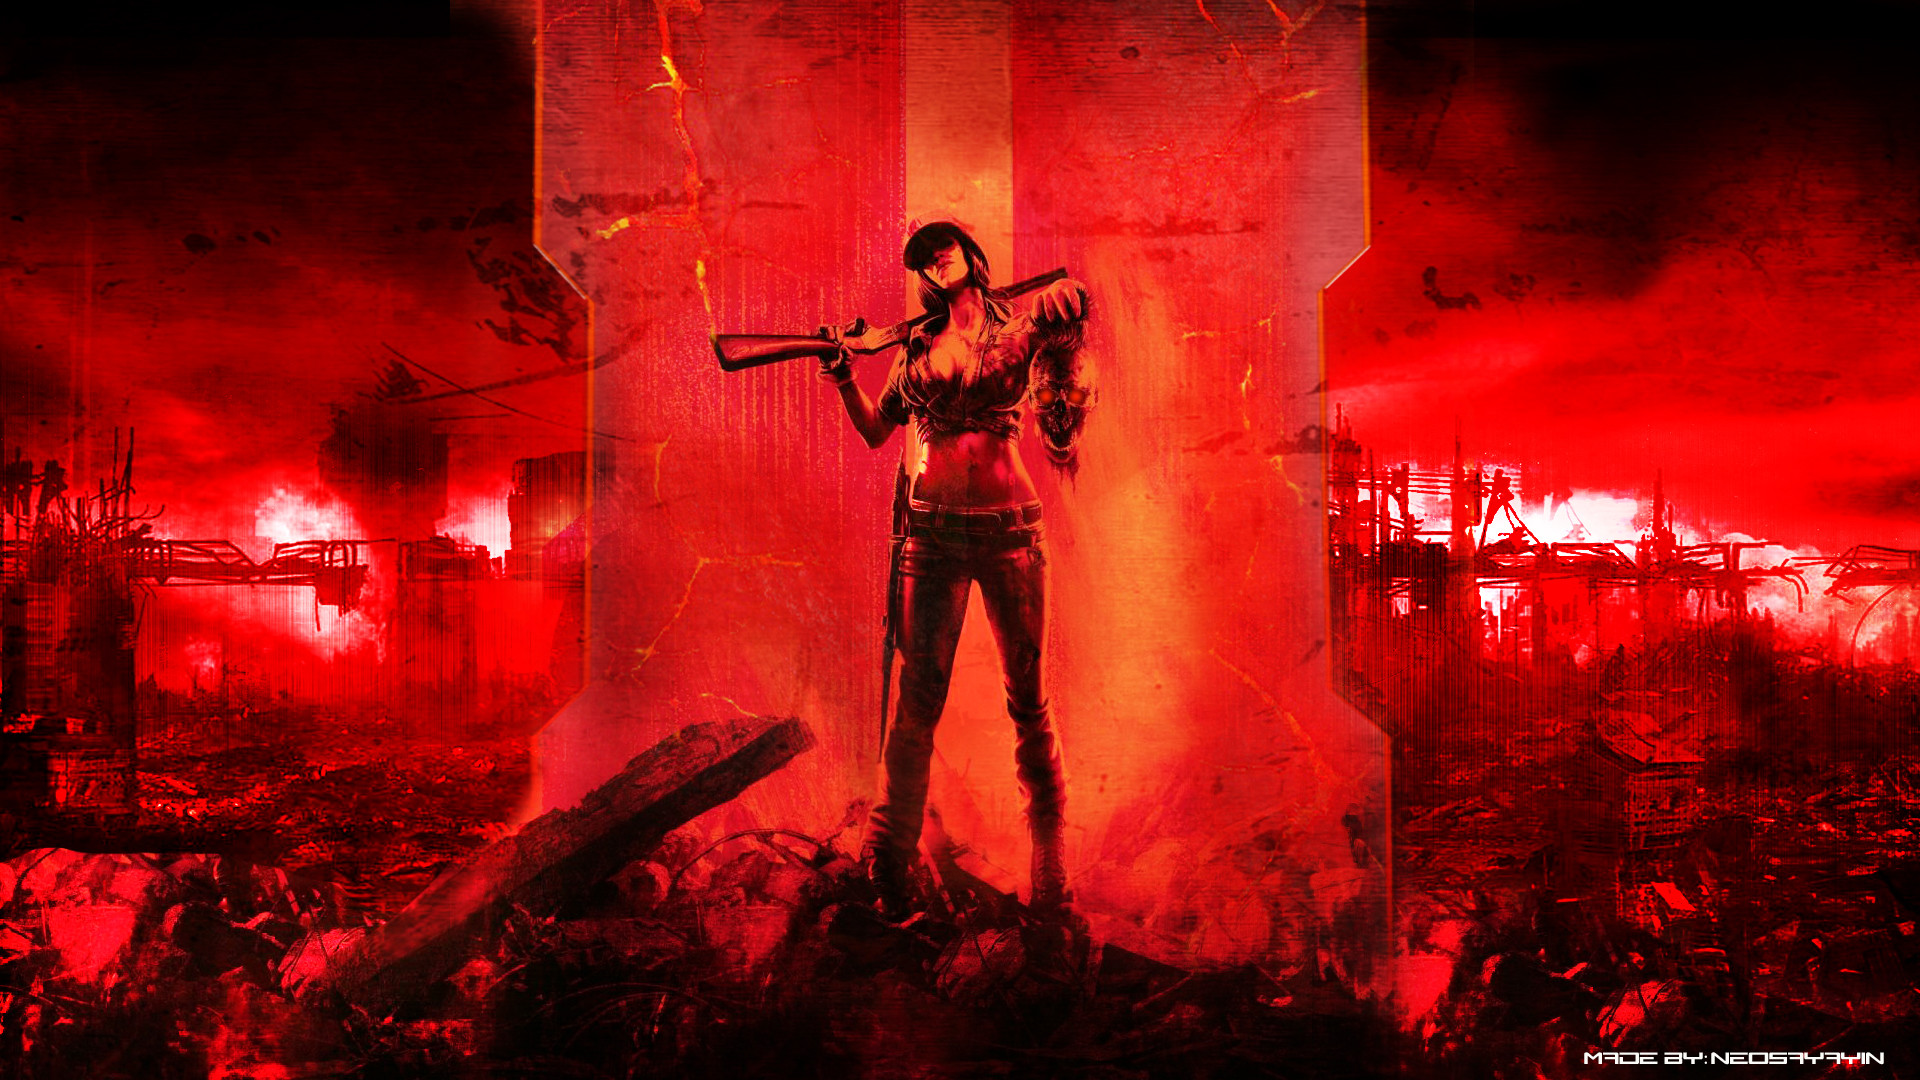 1920x1080 Image - Call of duty black ops 2 zombies wallpaper by